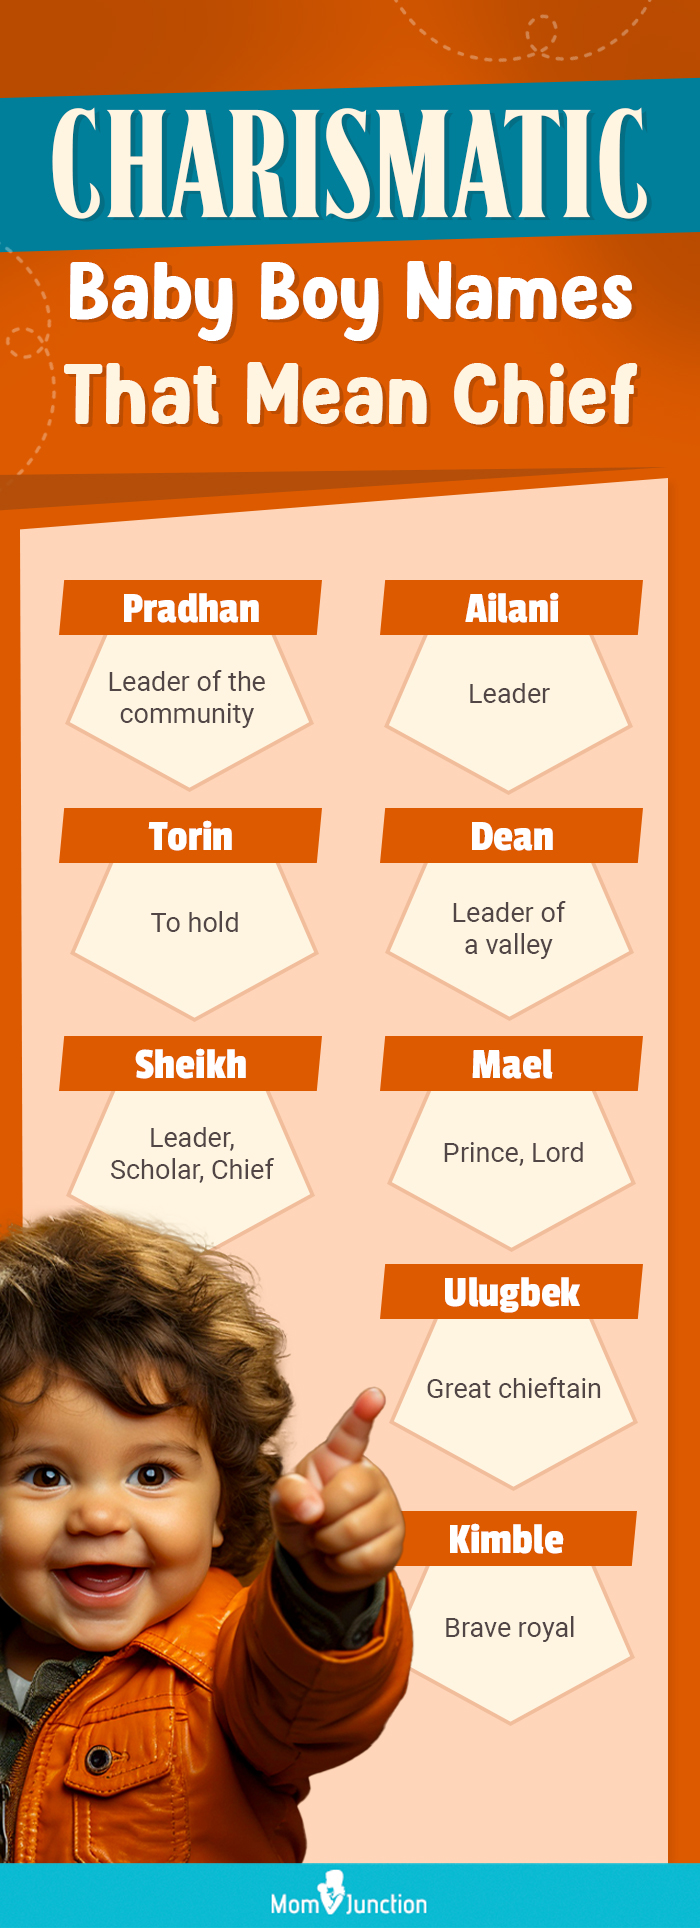 charismatic baby boy names that mean chief (infographic)